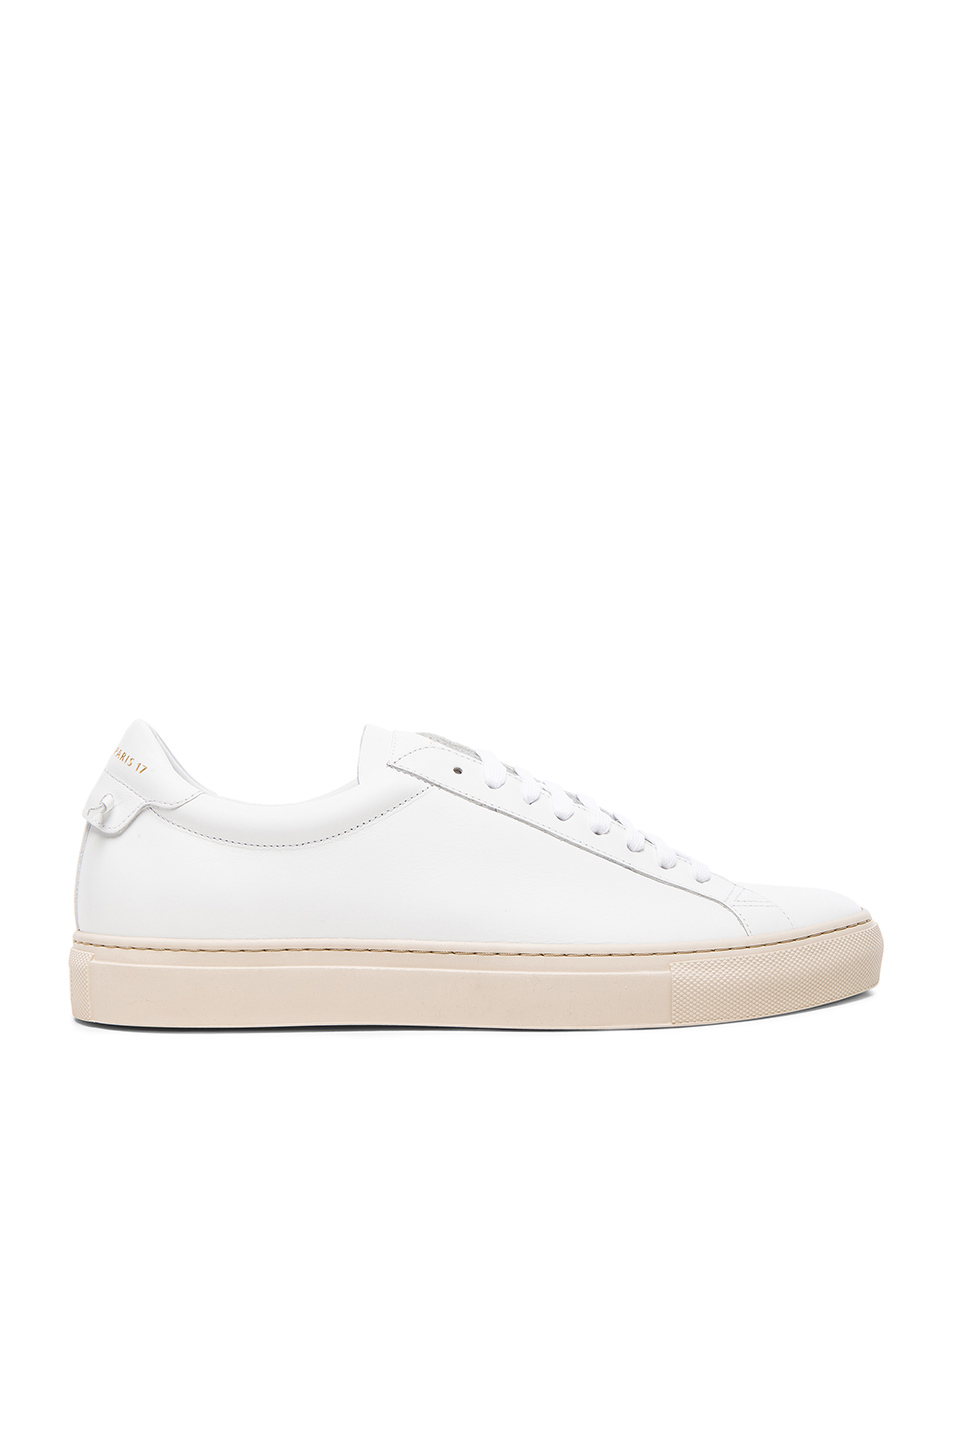 givenchy white leather sneakers